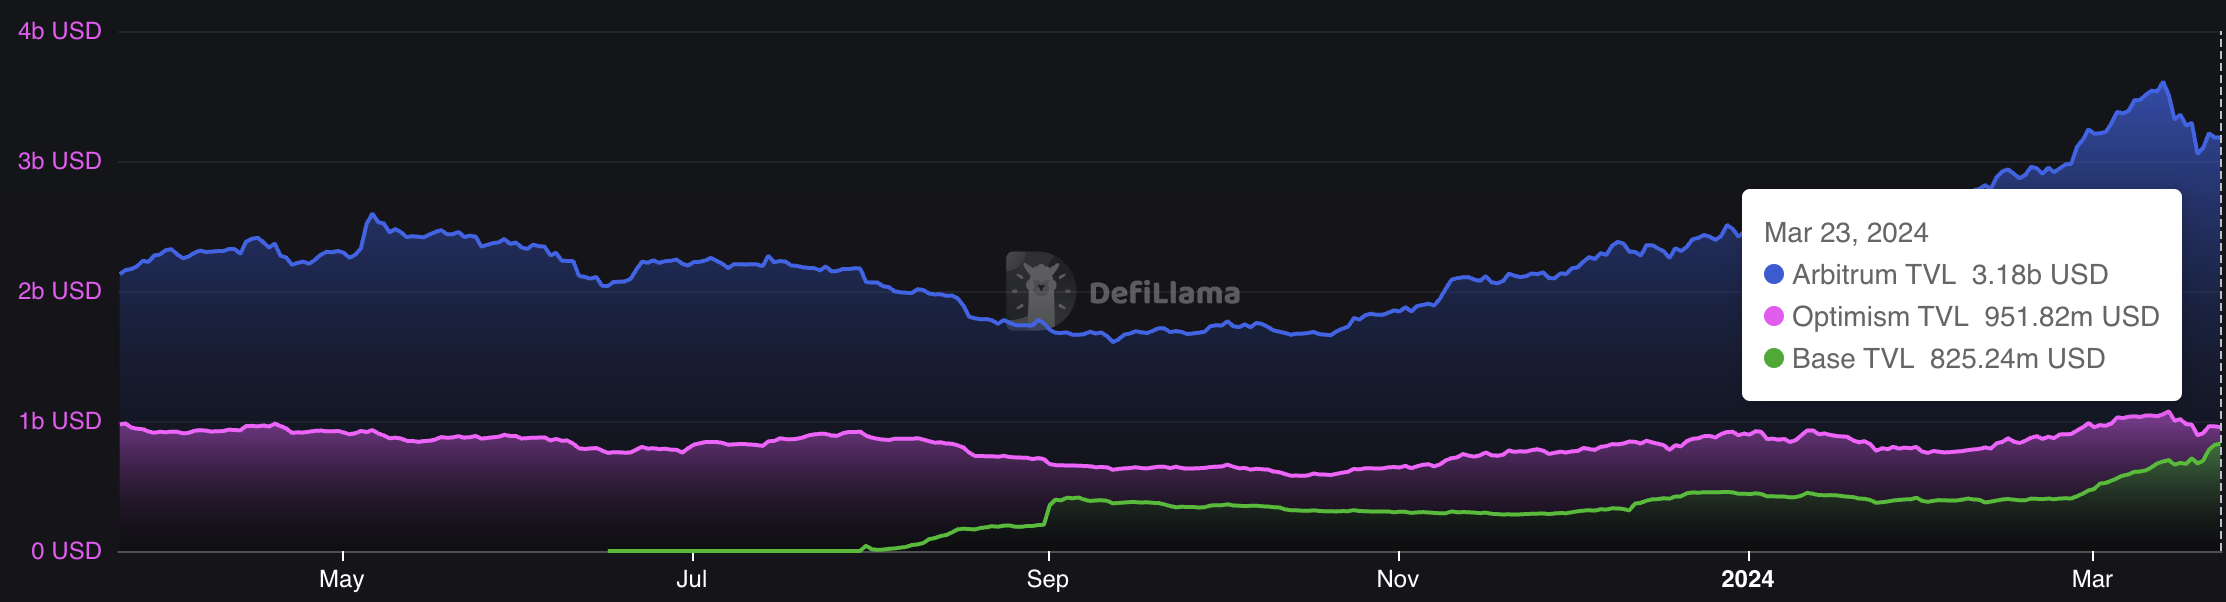 In the year considered, TVL on Arbitrum has been constantly and considerably higher than Optimism, Base, and the two combined. Source: DefiLlama (https://defillama.com/compare?chains=Arbitrum&chains=Base&chains=Optimism)